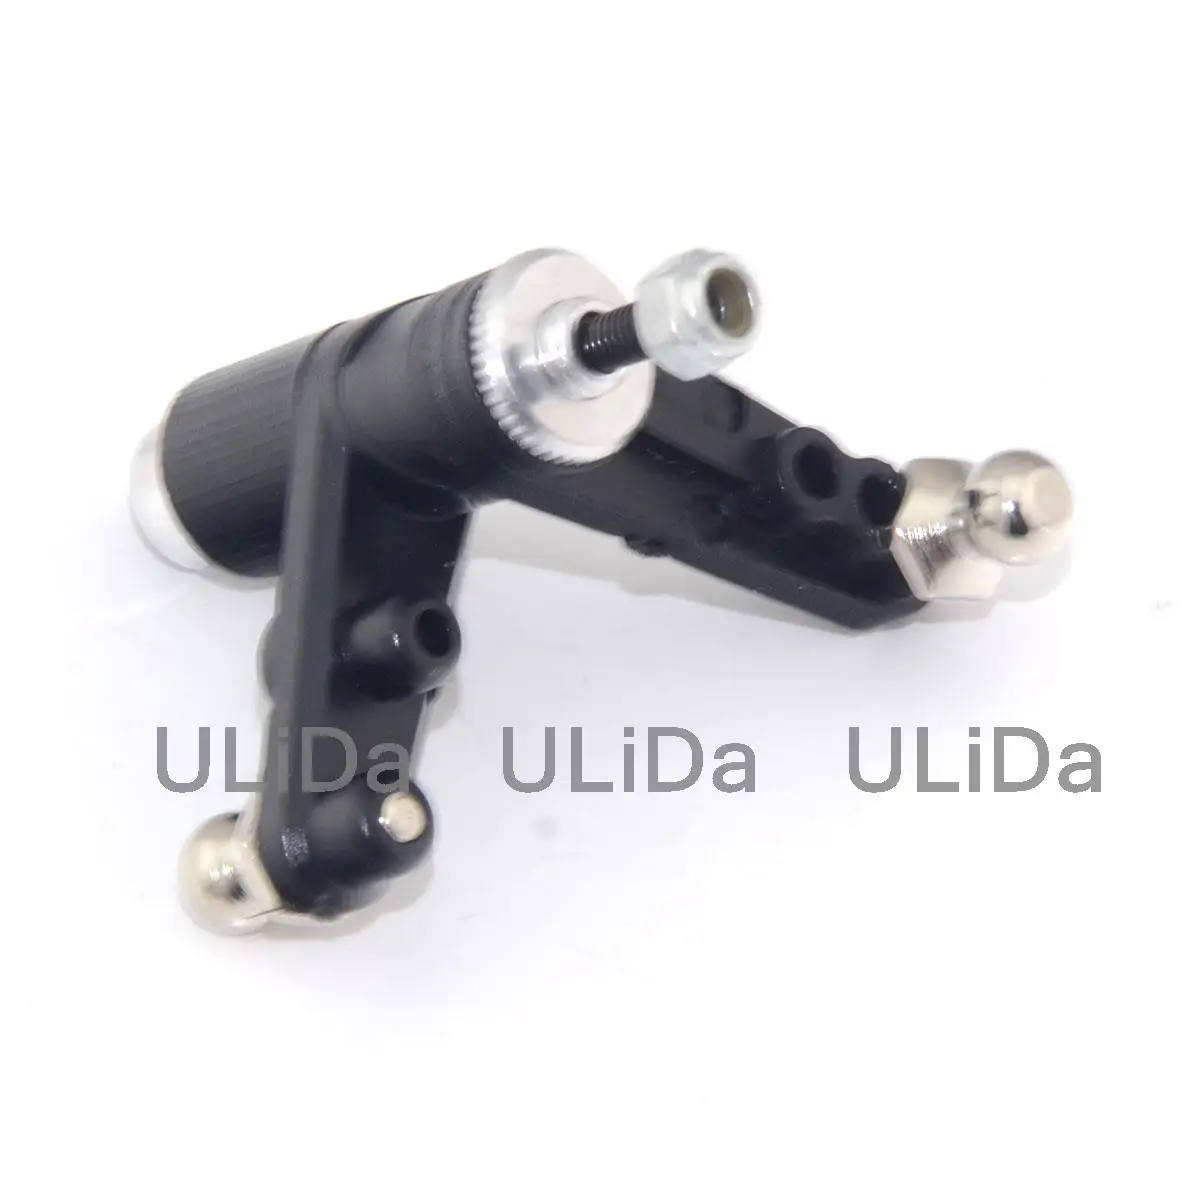 

RC CAR SPARE PARTS STEERING A FOR HSP 1/10 NITRO ON ROAD RACING CAR 94177 (part no. 02025)